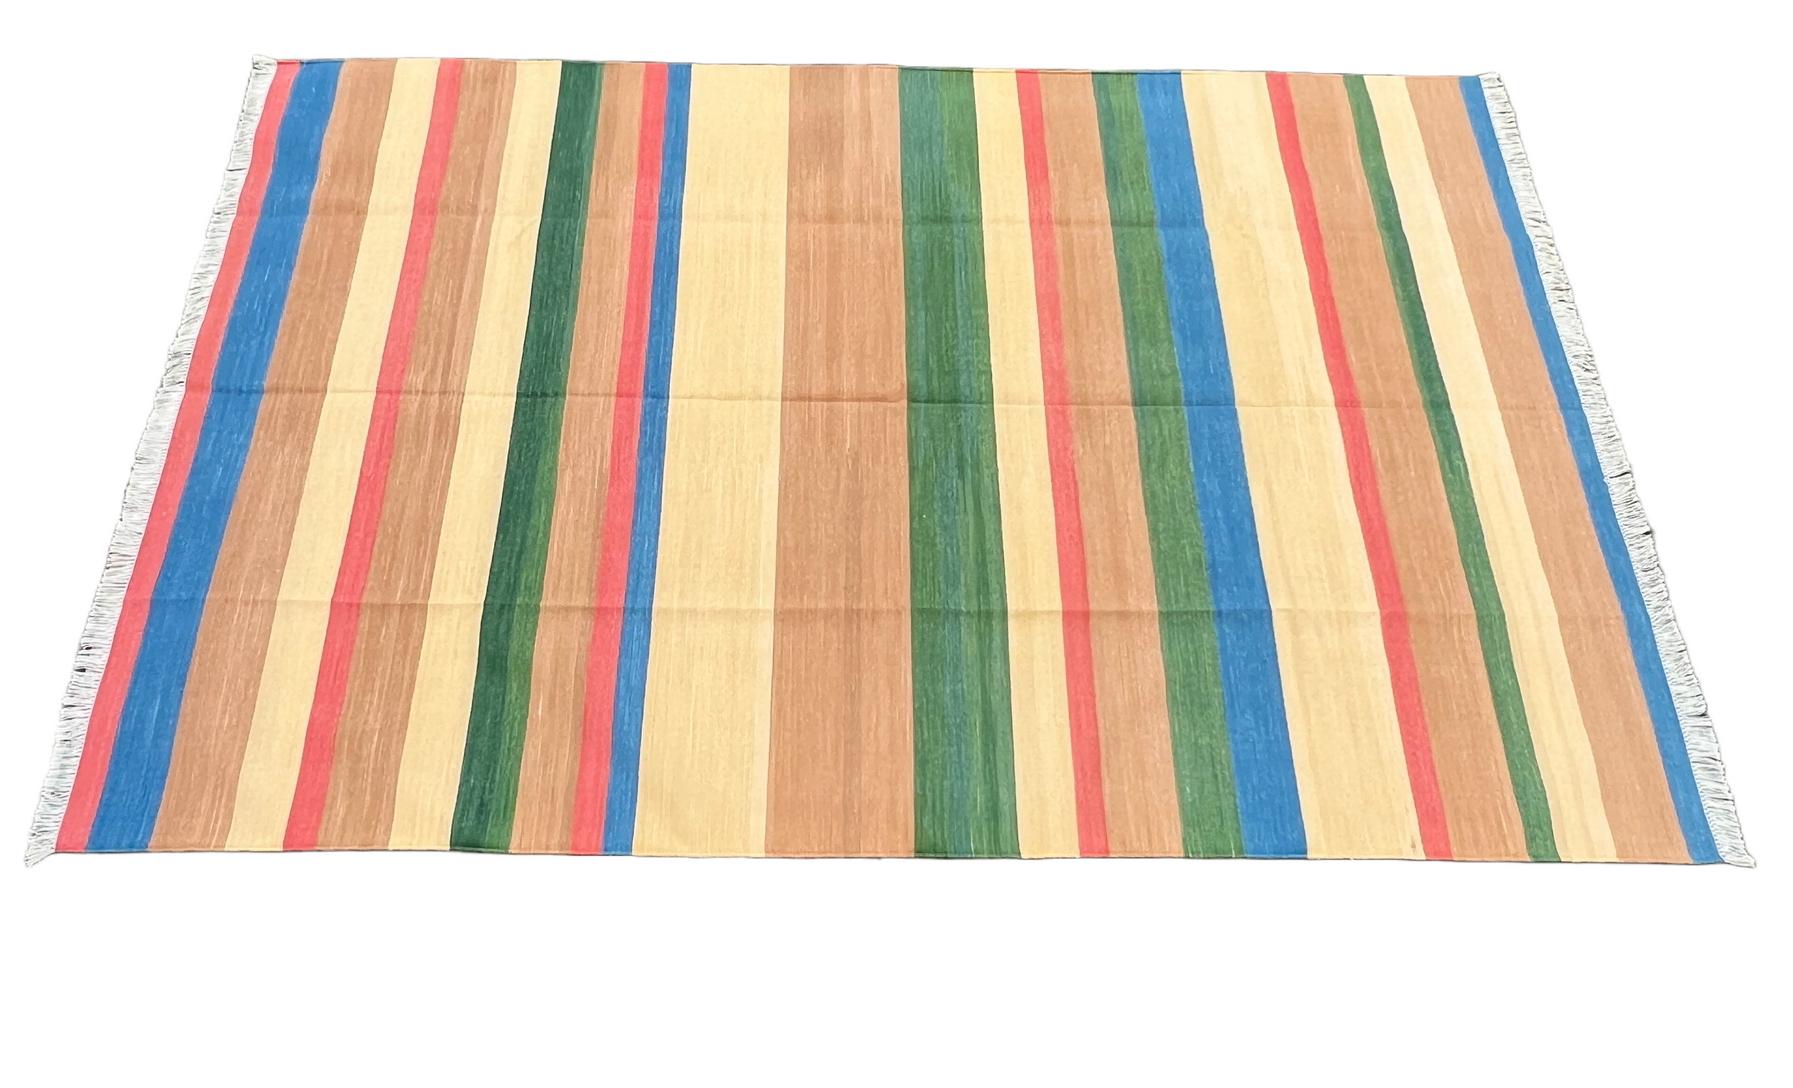 Handmade Cotton Area Flat Weave Rug, 6x9 Tan, Blue And Green Striped Dhurrie Rug For Sale 2